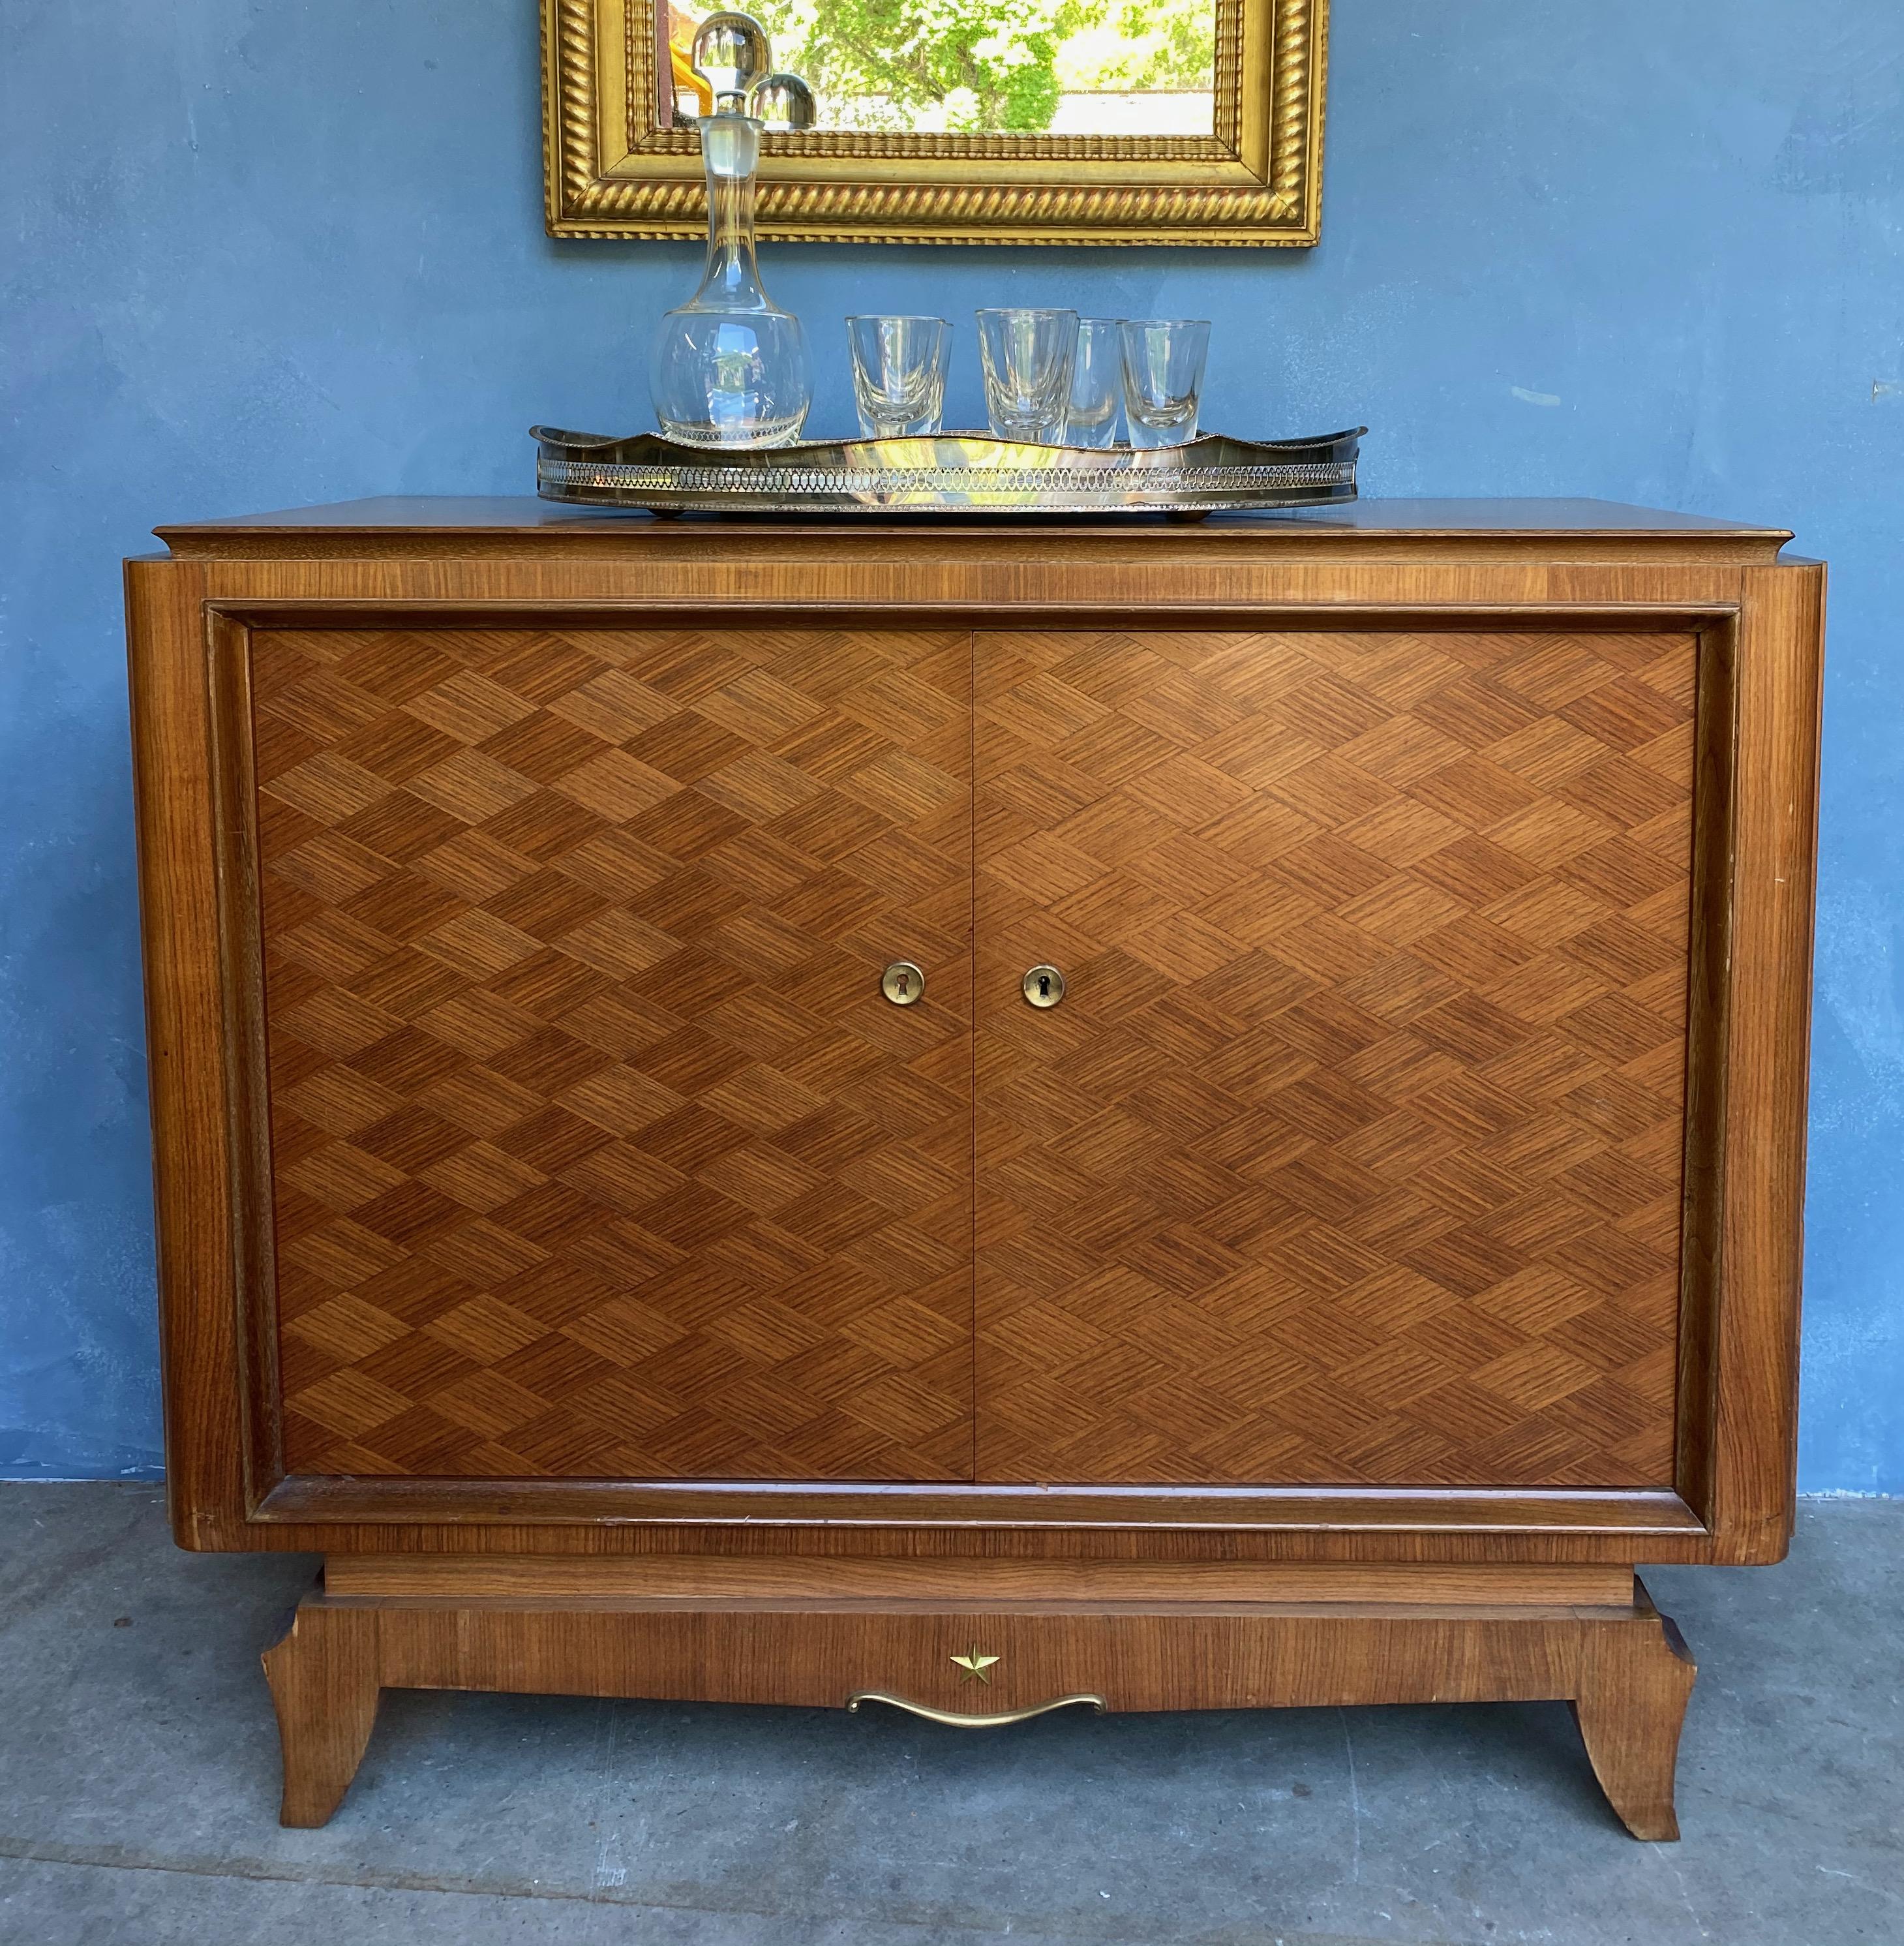 Small French sideboard or server from the late 1940’s. The cabinet is rosewood veneered and sycamore interior. The doors are veneered in diamond shaped rosewood sections that give the piece an interesting geometric effect. The interior of doors are